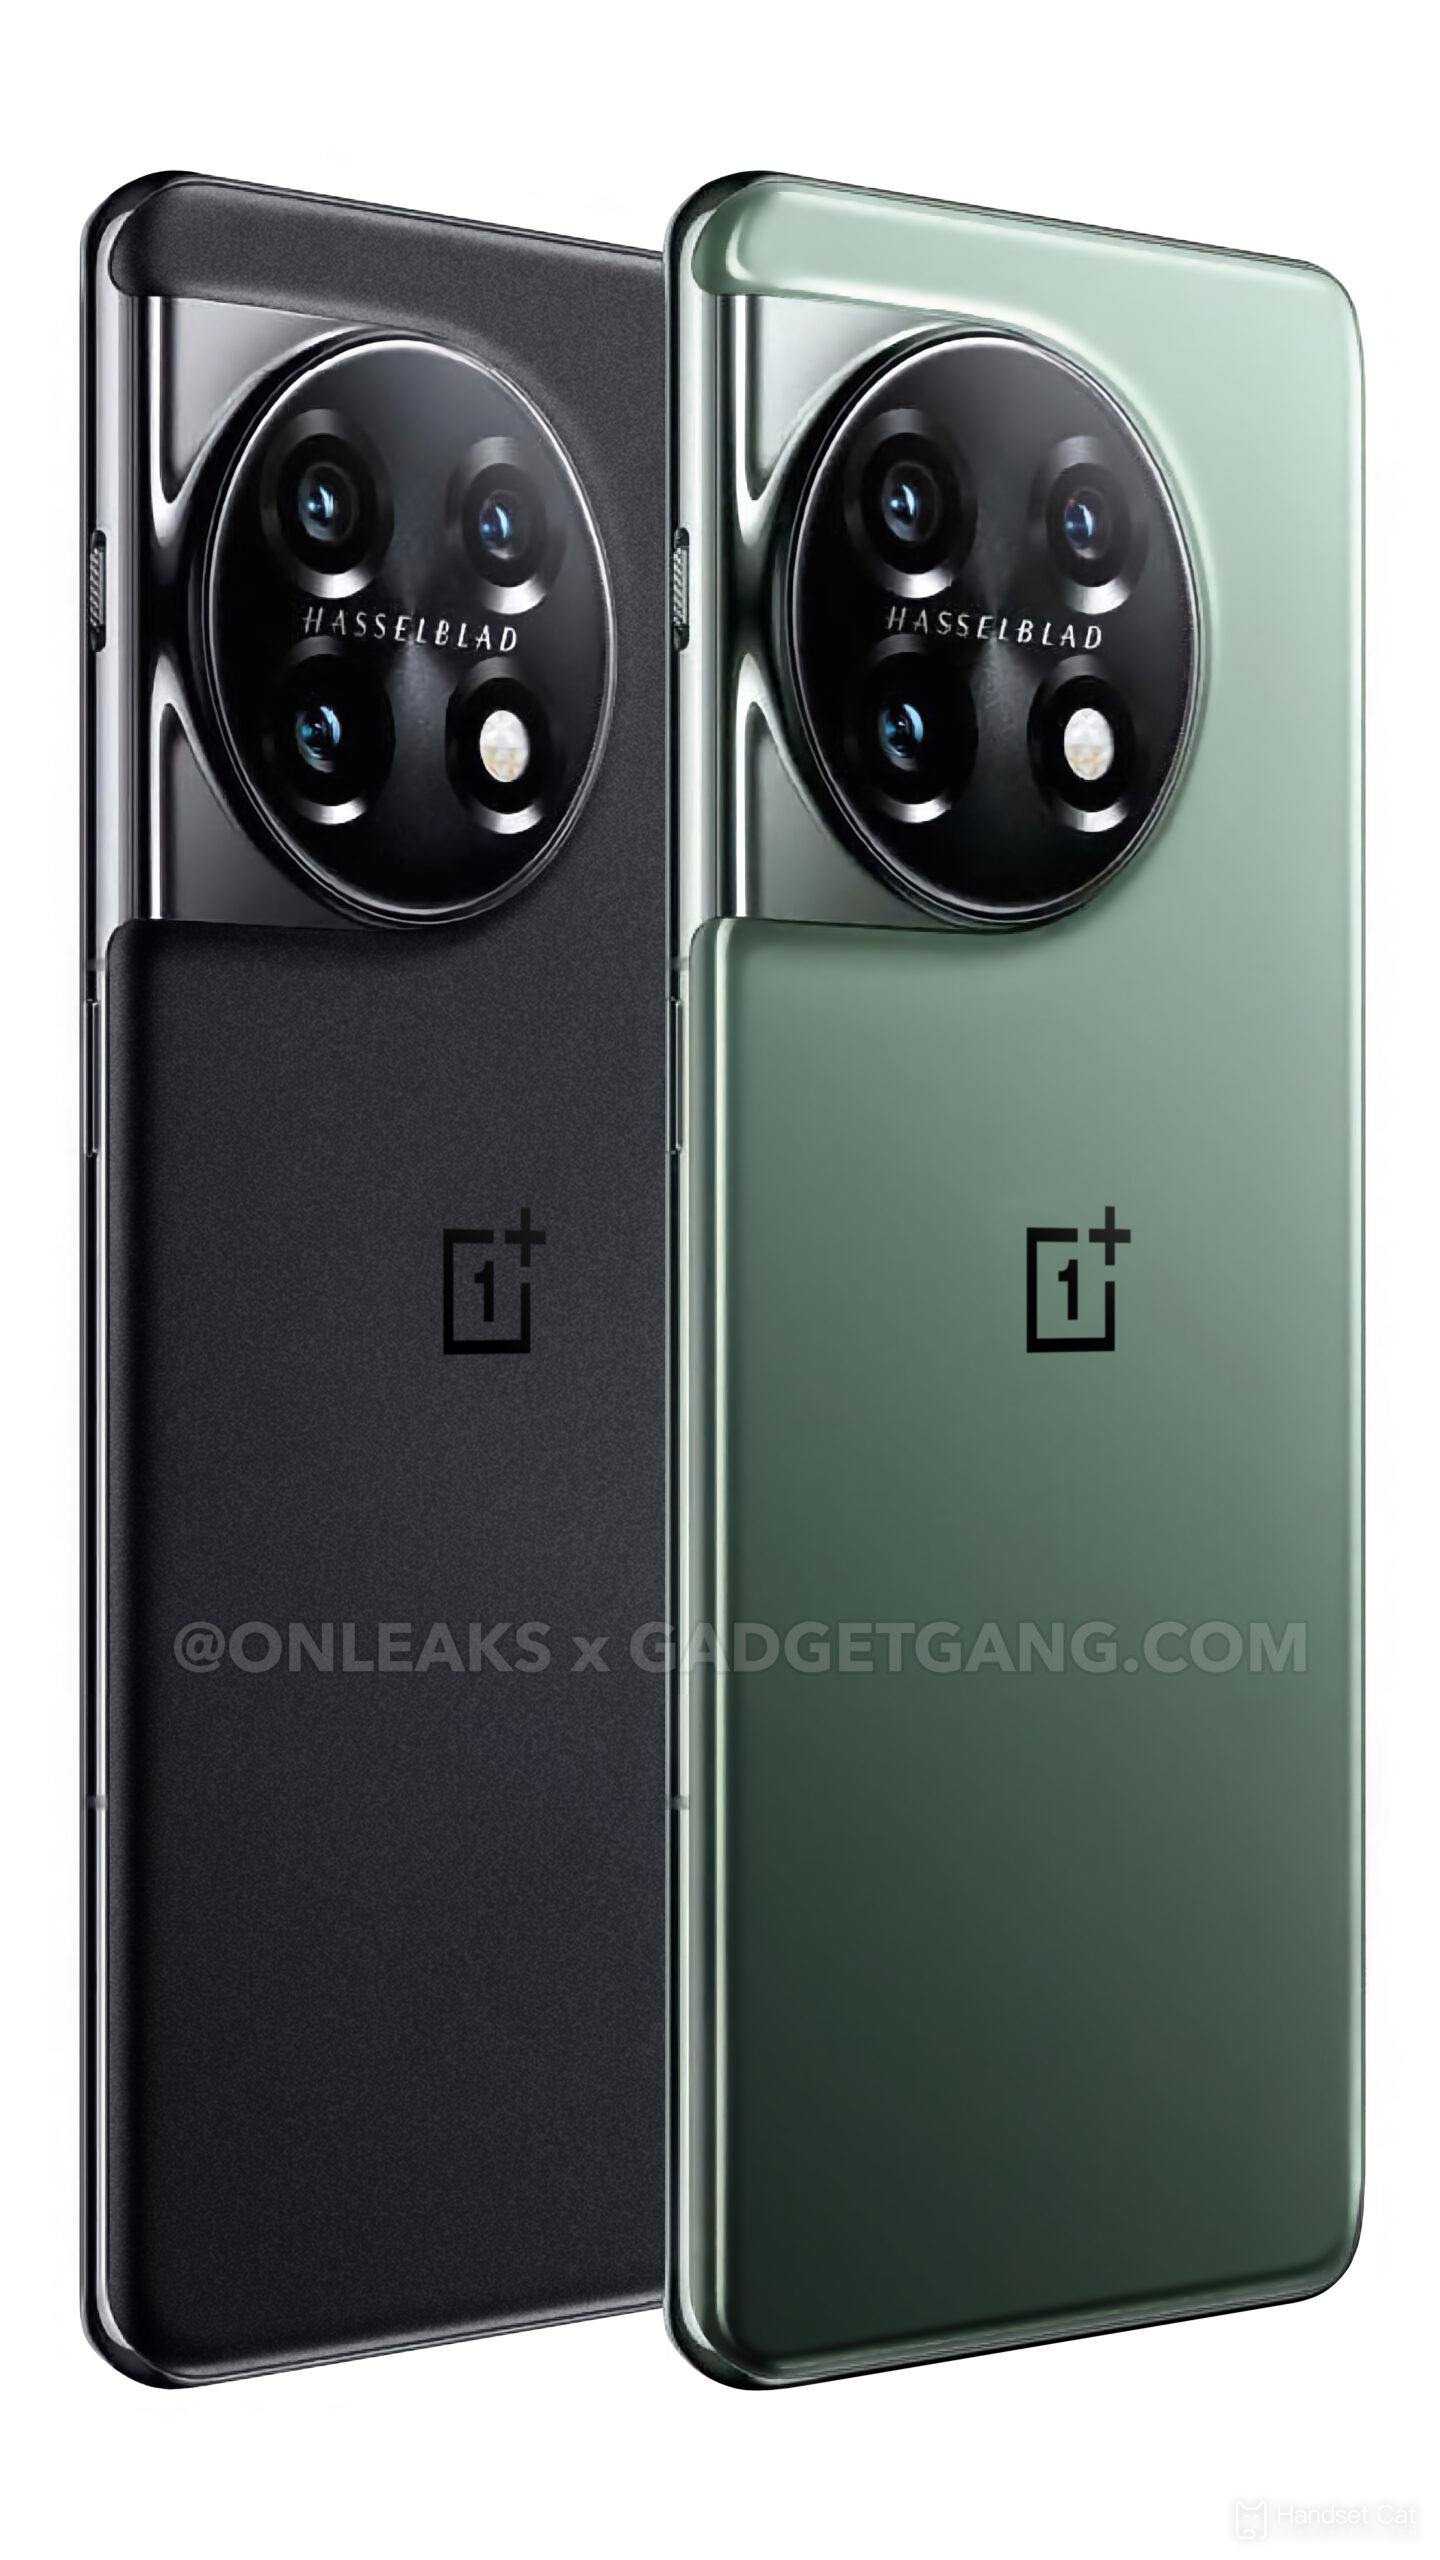 One plus 11 has several colors